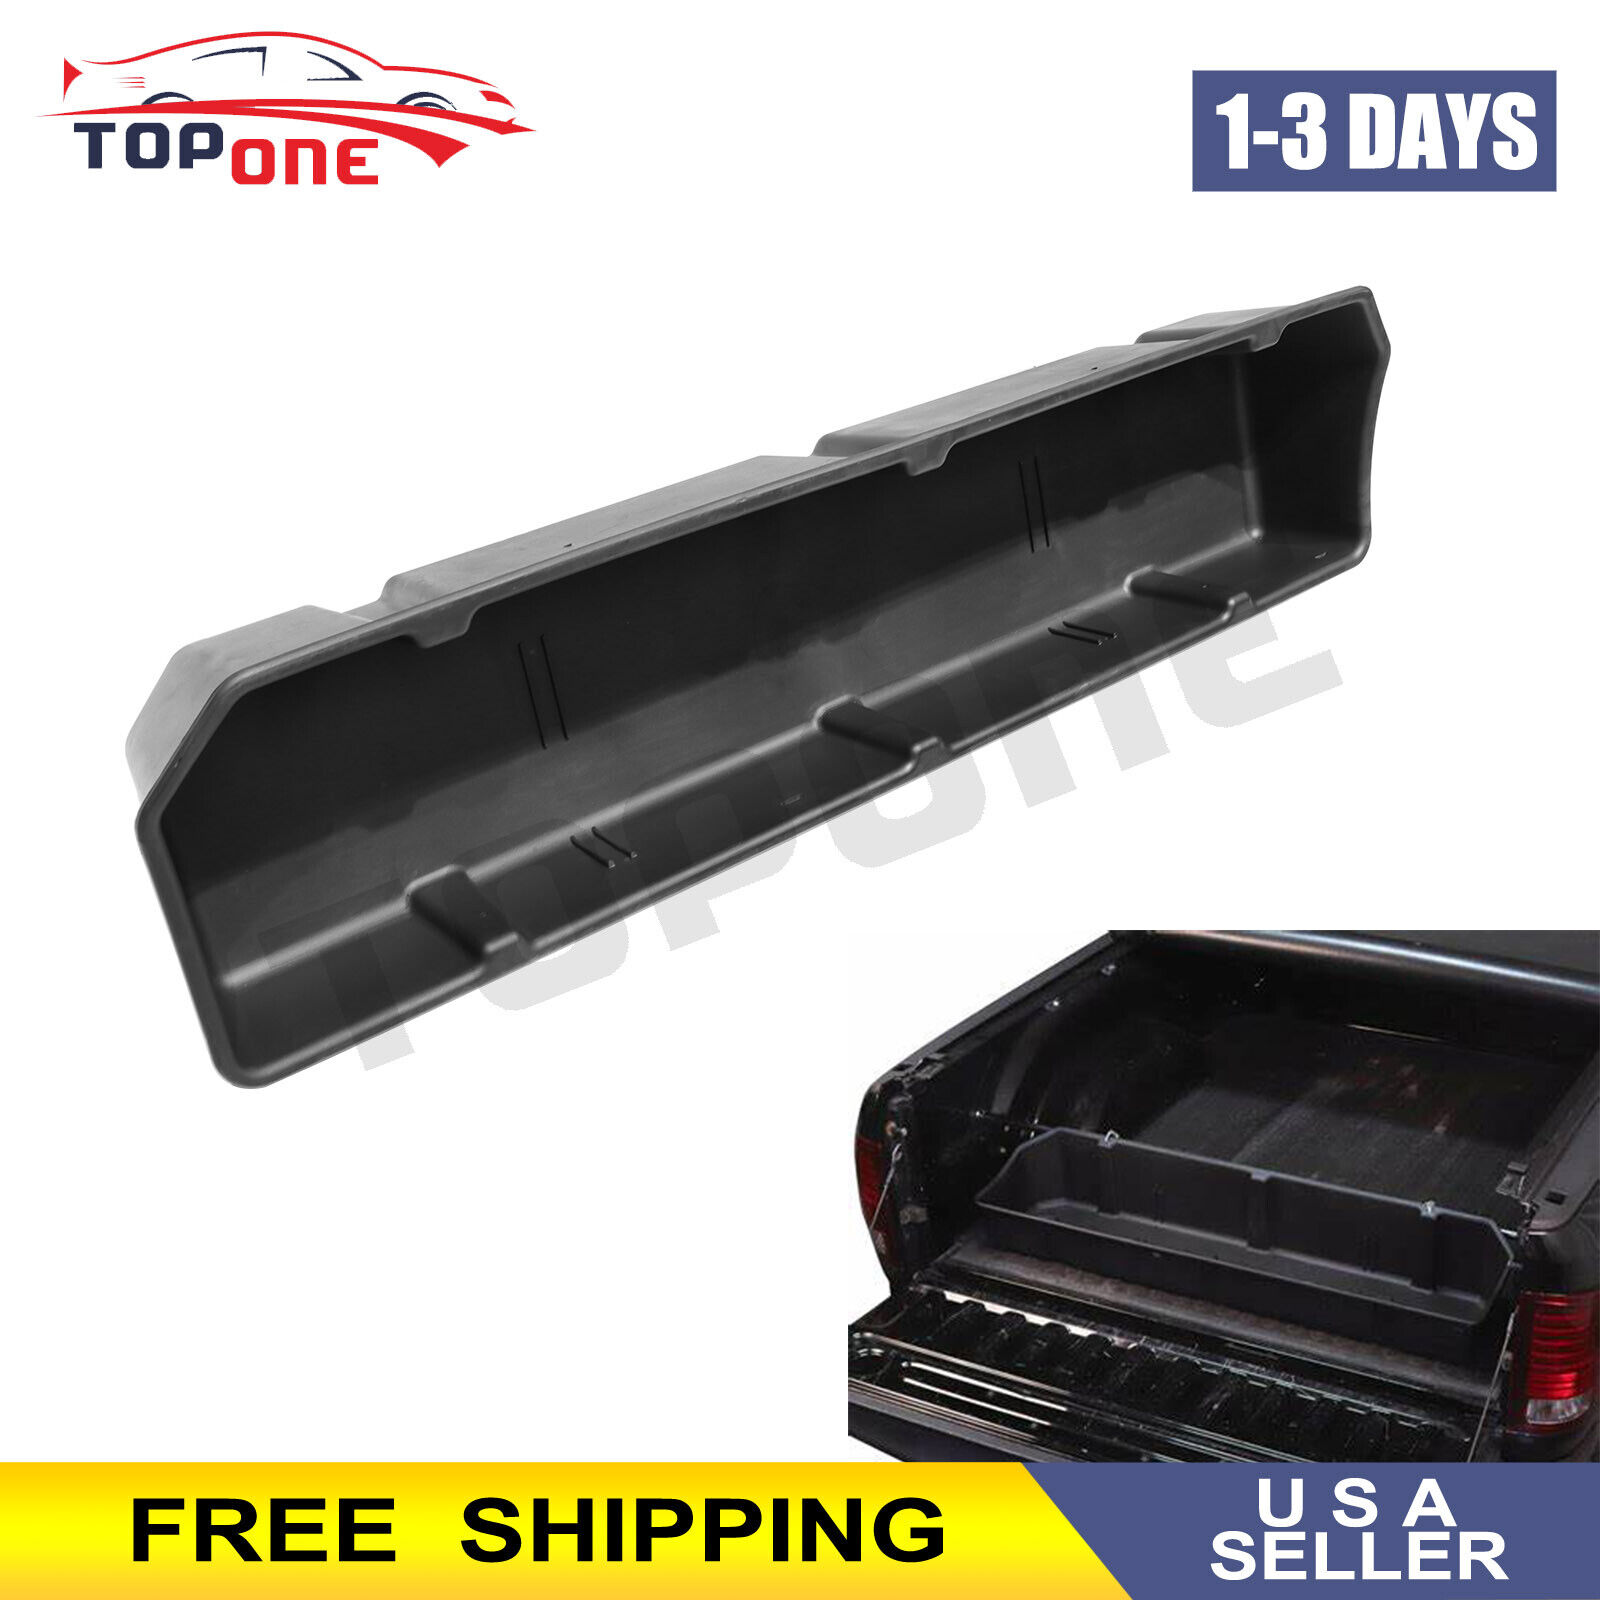 For Ford Chevy GMC Dodge Ram Toyota Full Size Truck Bed Storage Cargo Organizer